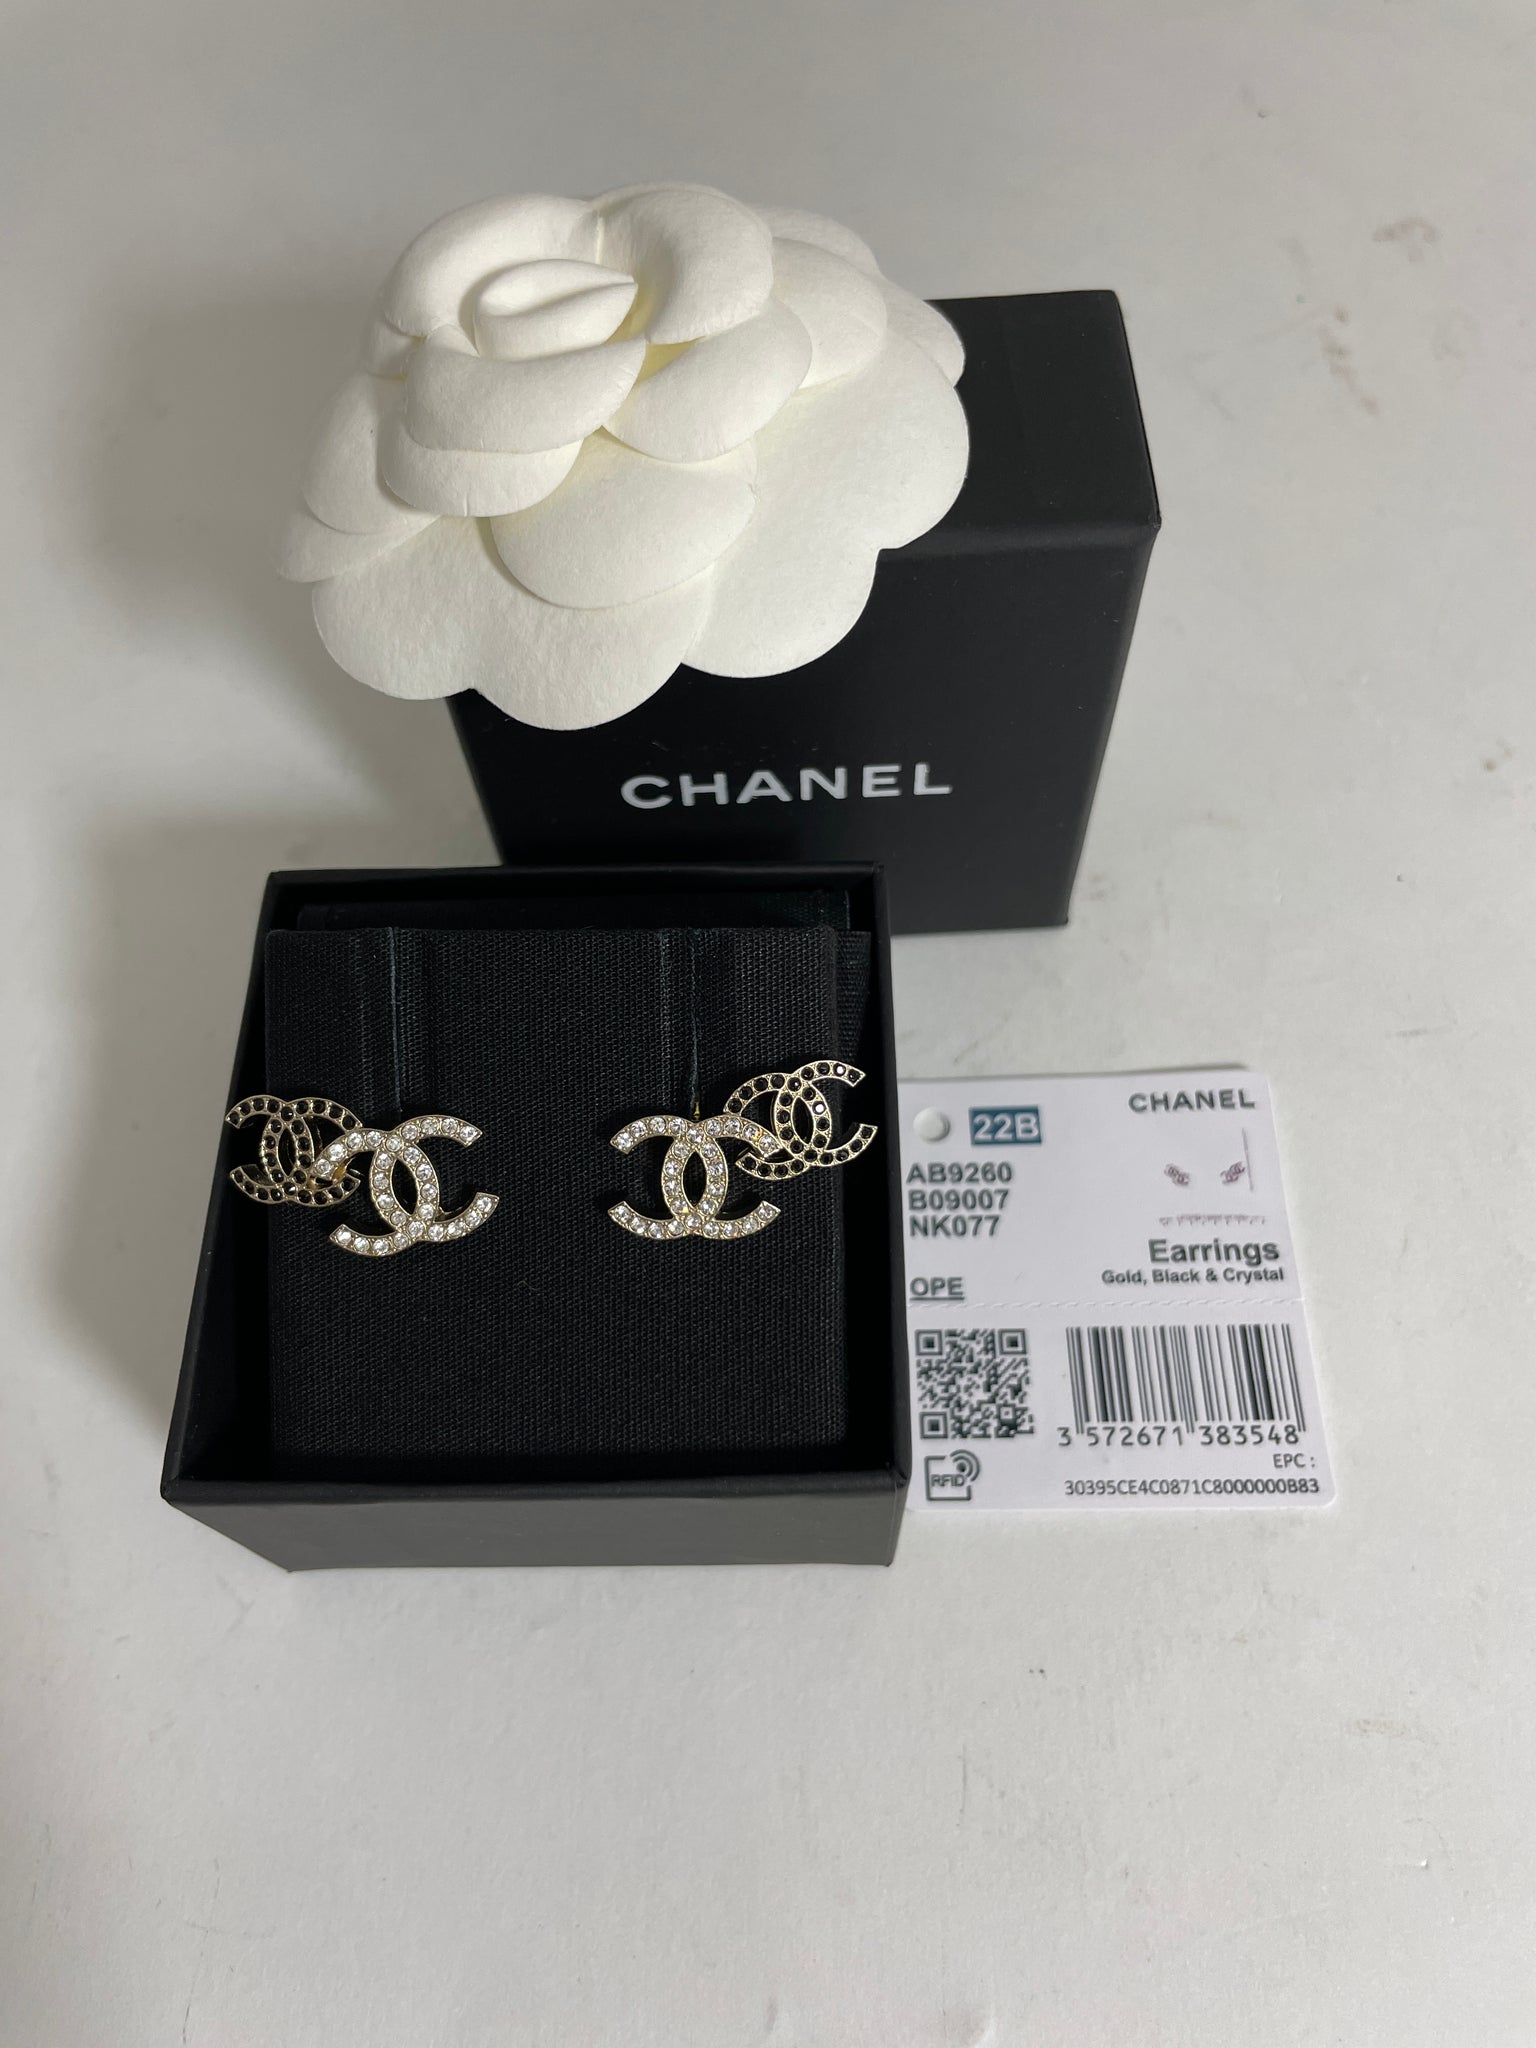 Chanel 22B CC Gold Black White Crystal Double Stud Earrings – The